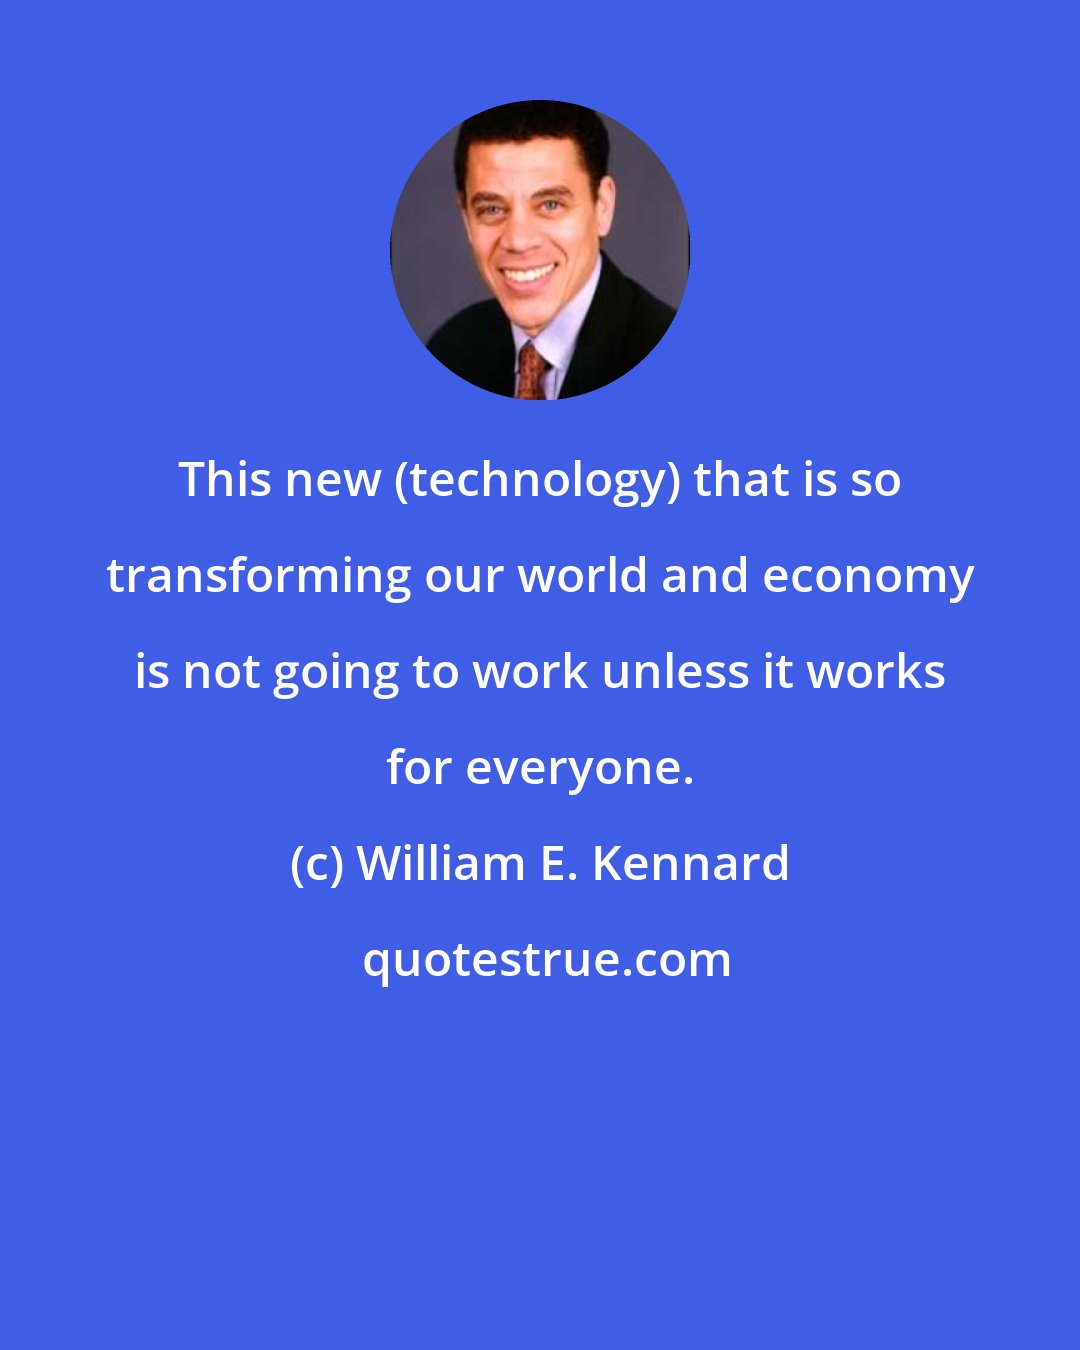 William E. Kennard: This new (technology) that is so transforming our world and economy is not going to work unless it works for everyone.